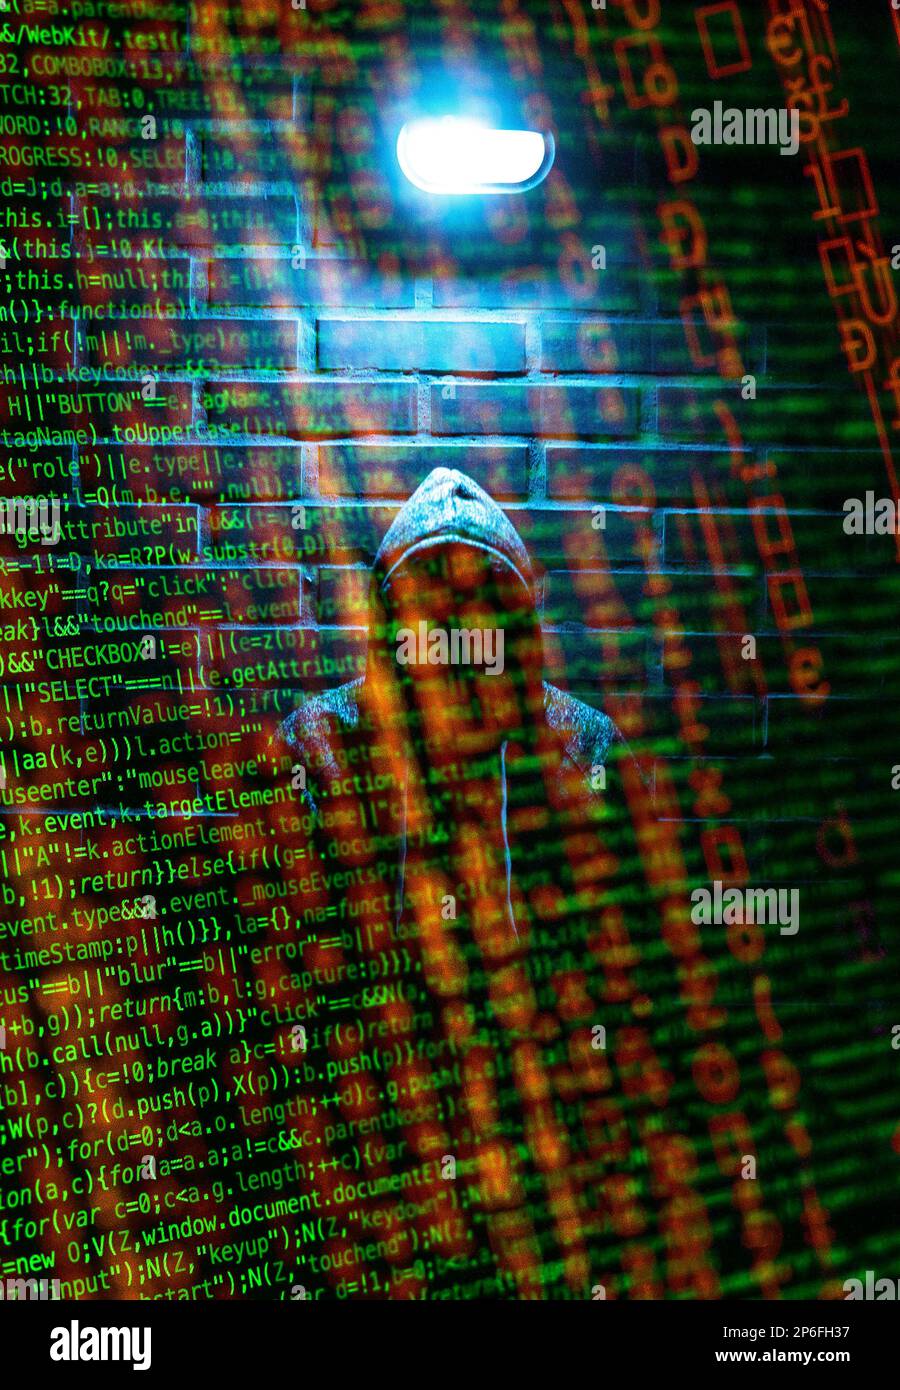 A hacker in a hoodie behind lines of code Stock Photo